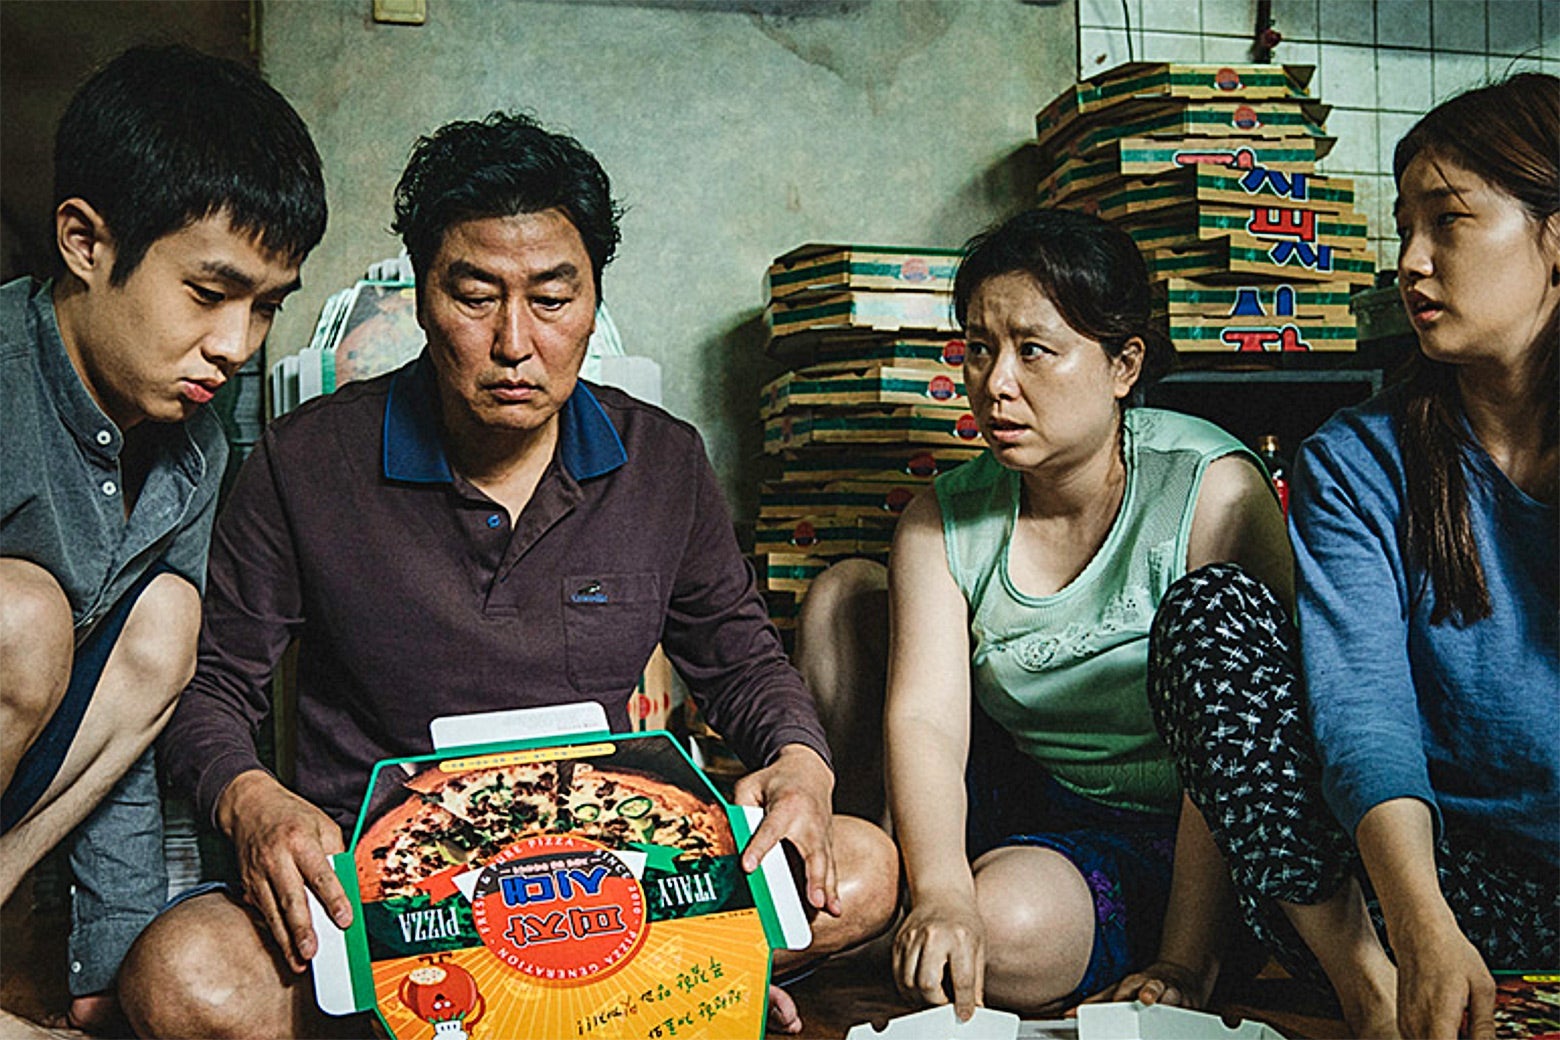 In a scene from Parasite, the Kim family gathers on the floor, surrounded by pizza boxes.